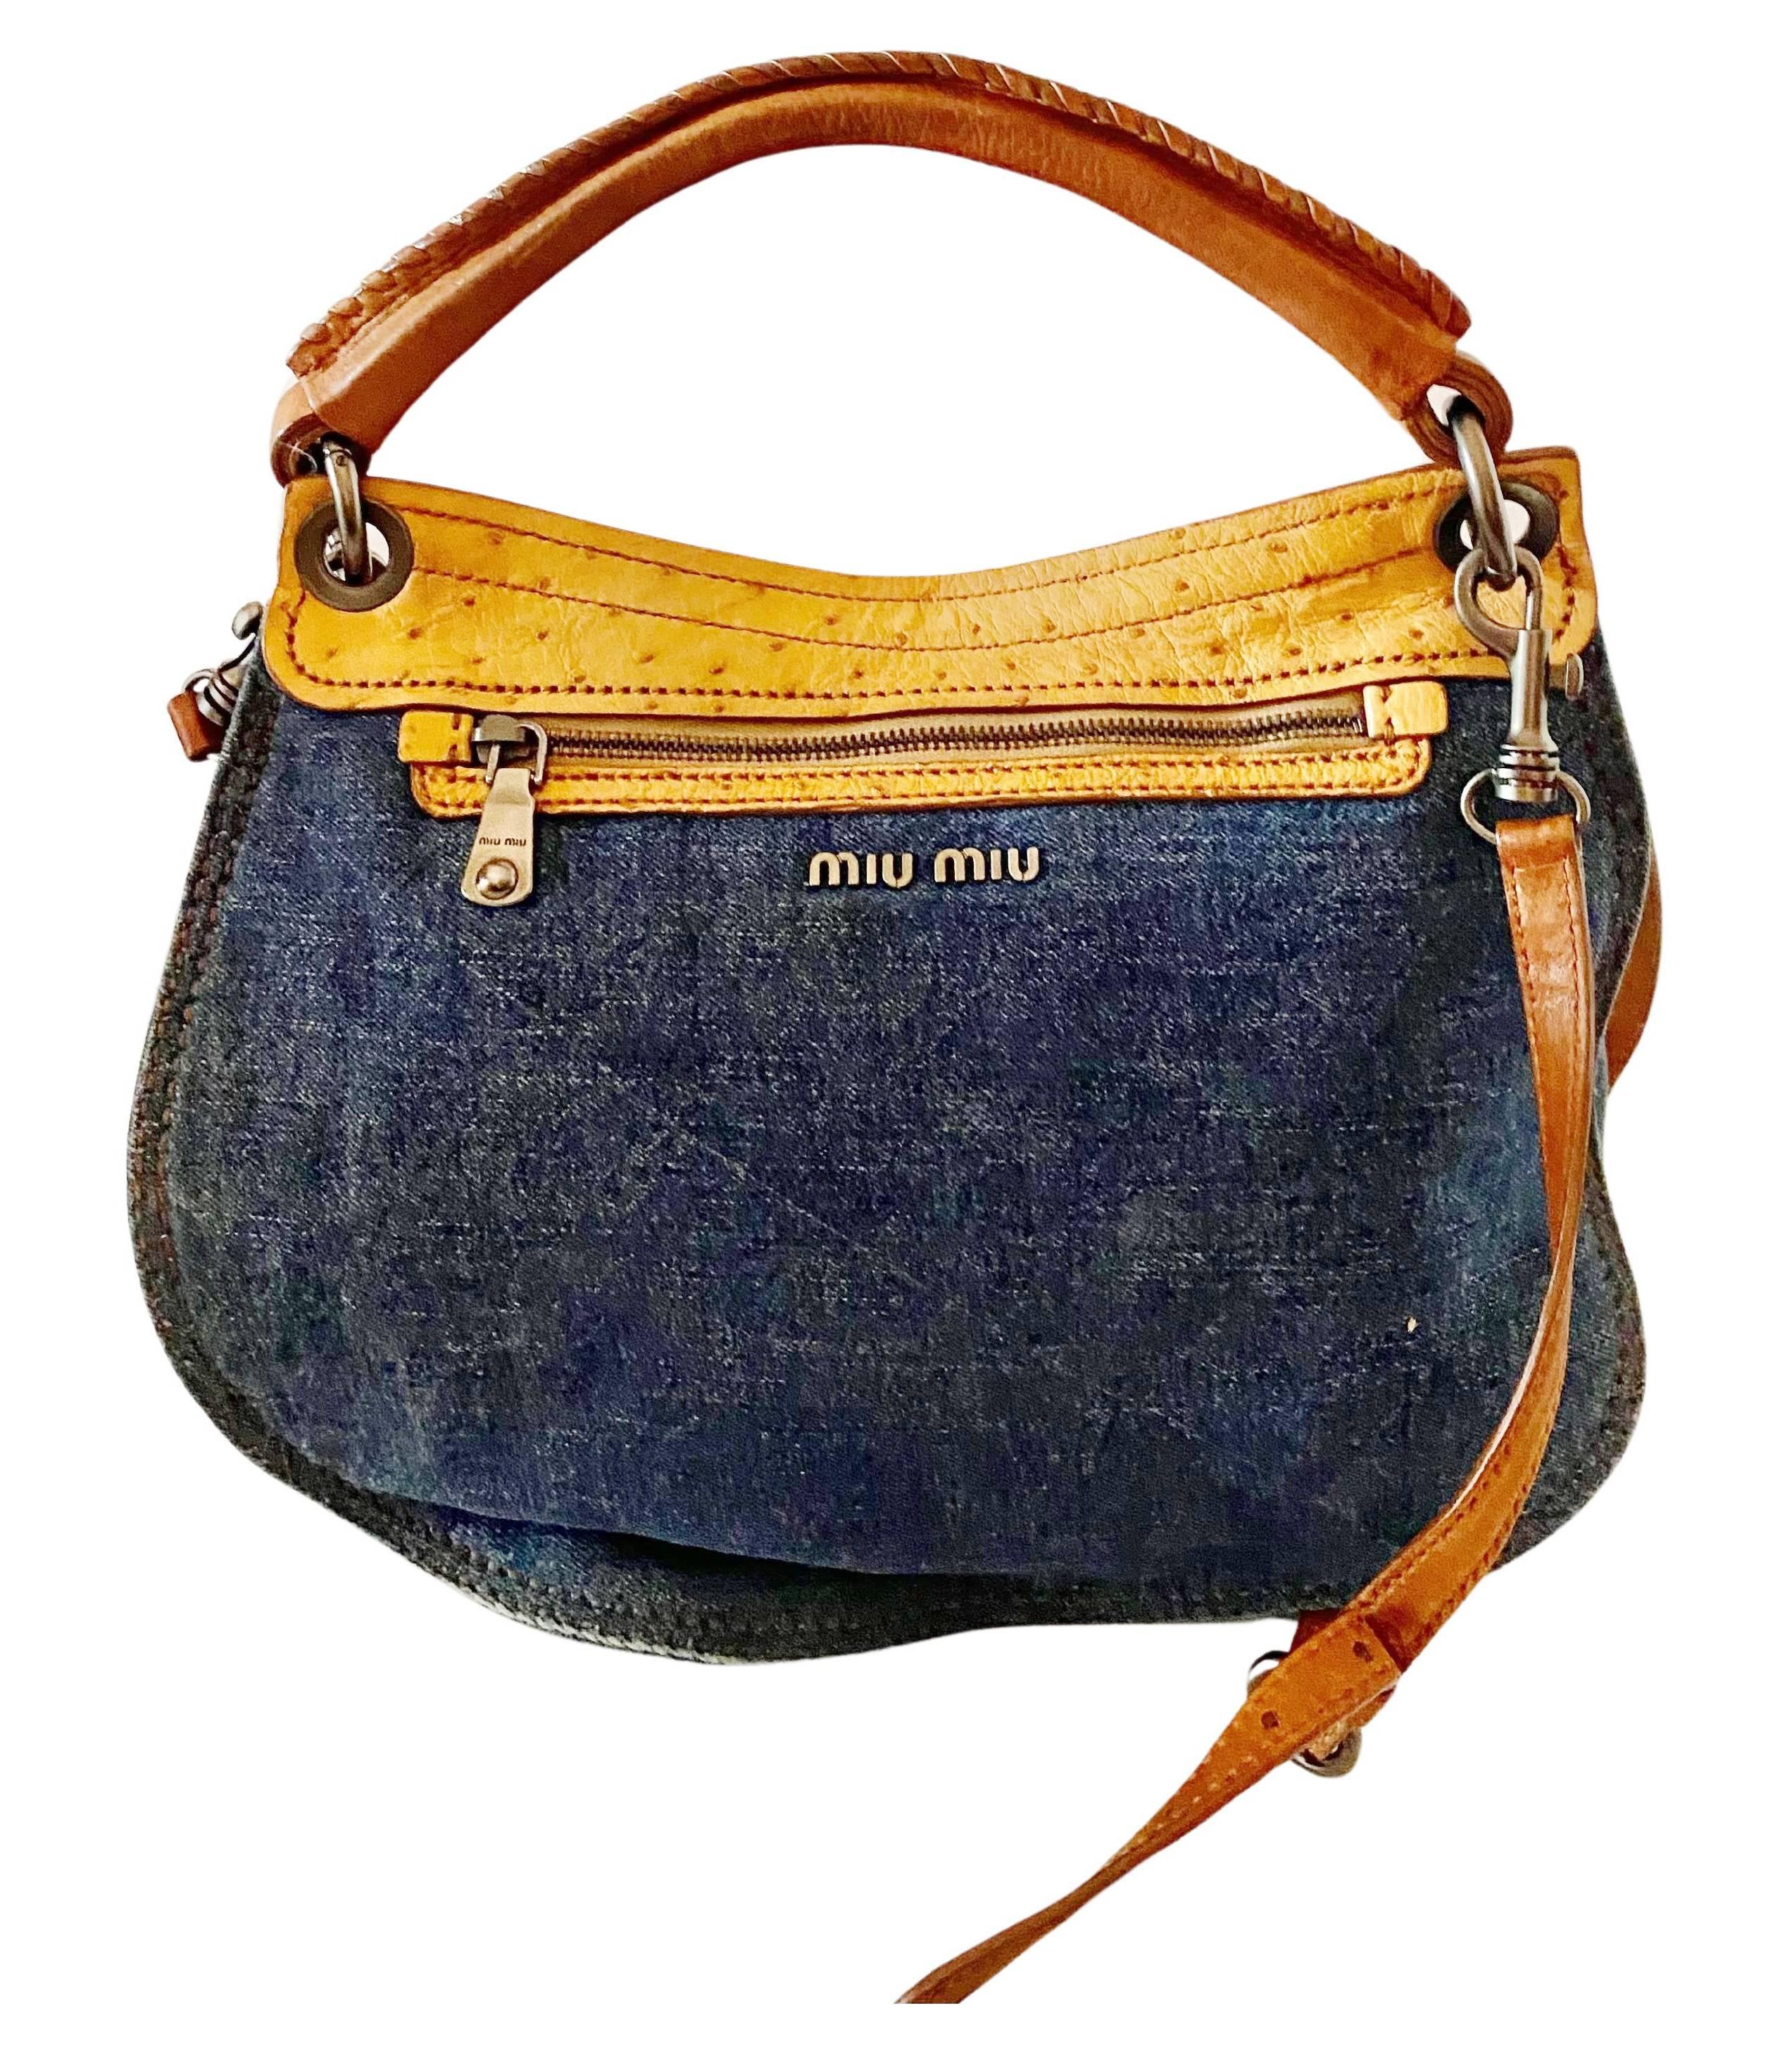 2000s miu miu Tan Leather and Denim Hobo Shoulder Bag  In Good Condition For Sale In London, GB